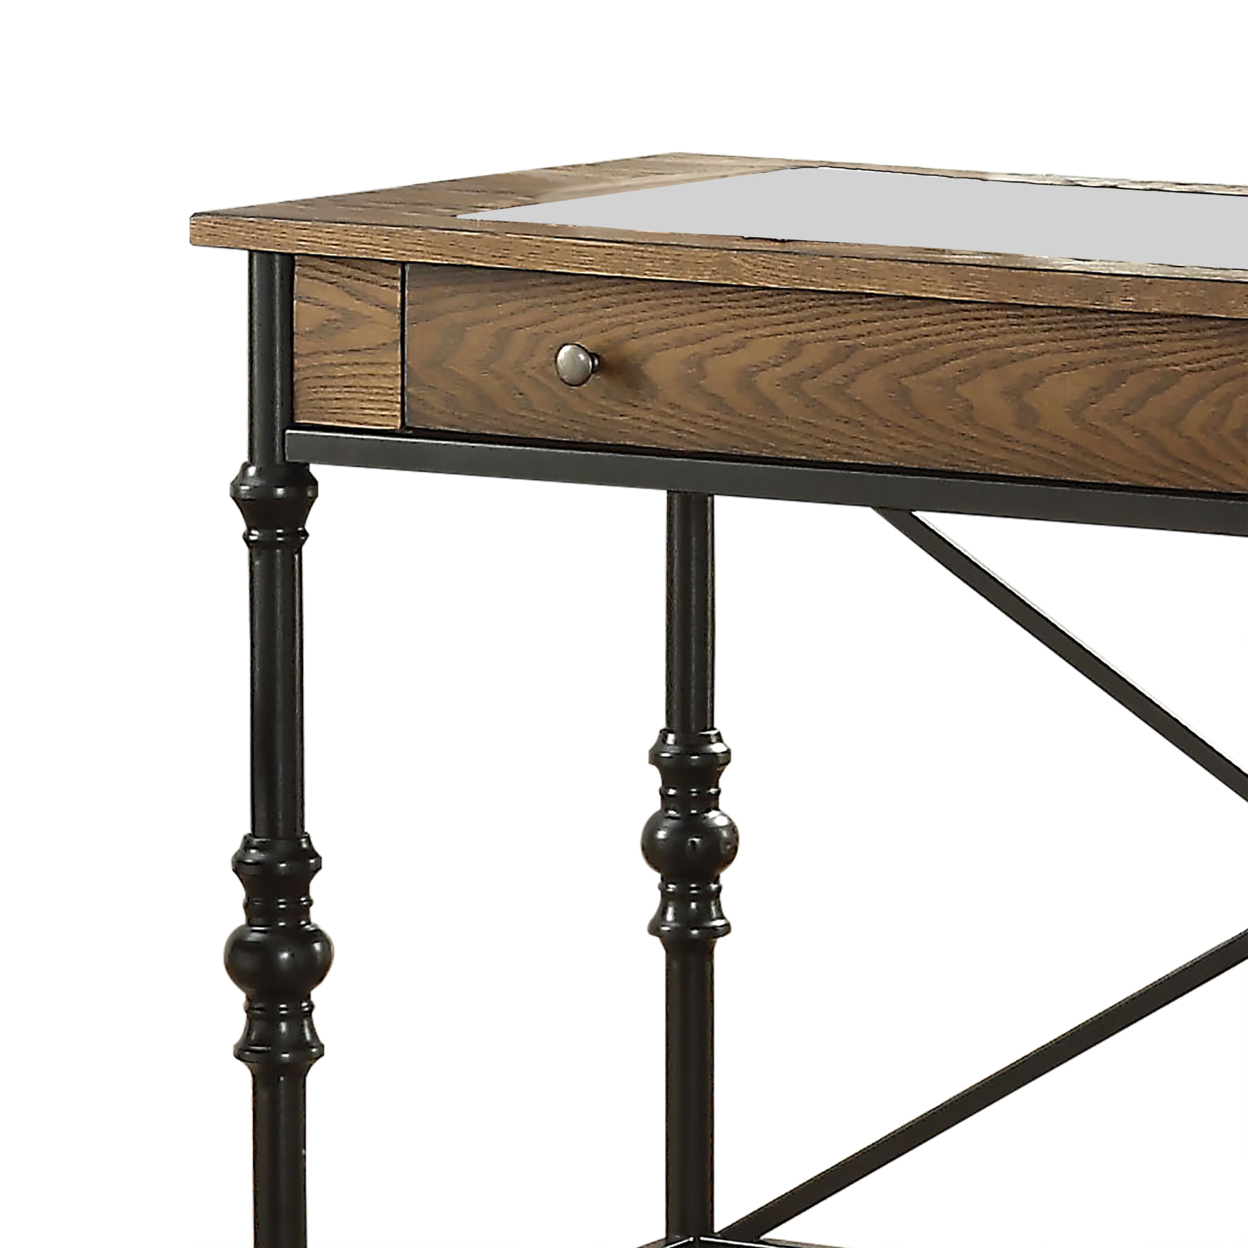 Wood And Metal Counter Height Table With One Large Drawer, Walnut & Black- Saltoro Sherpi